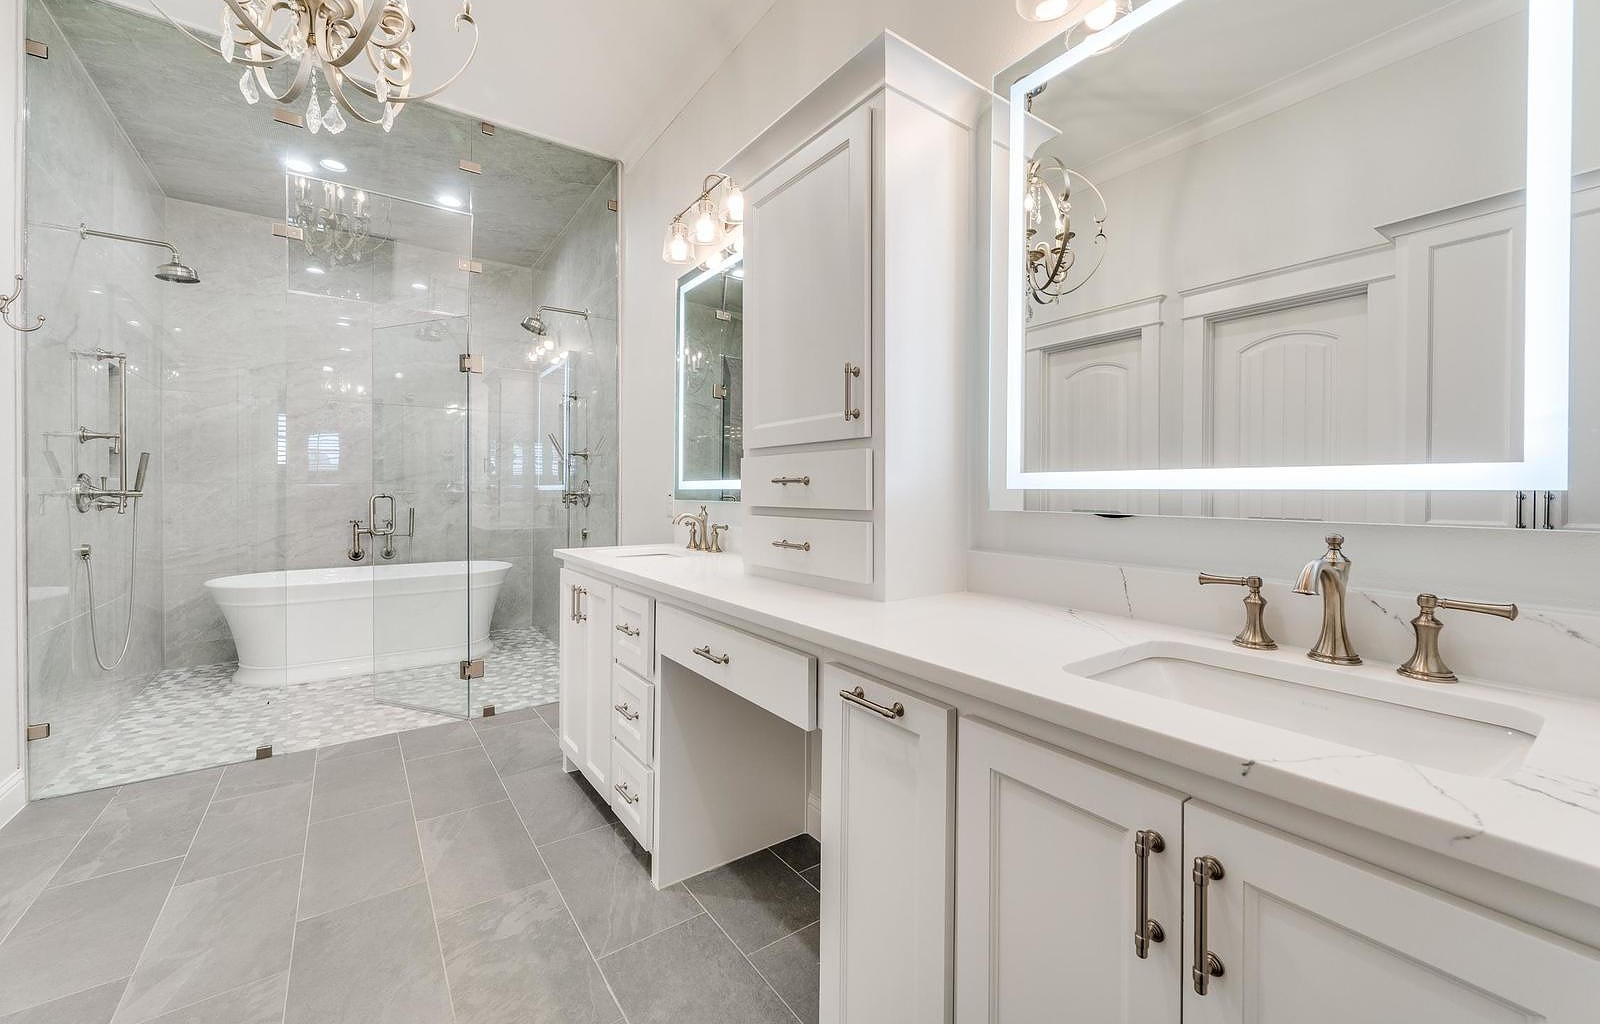 Home Remodeling Projectby DFW Improved in Bathroom Renovation in McKinney, TX